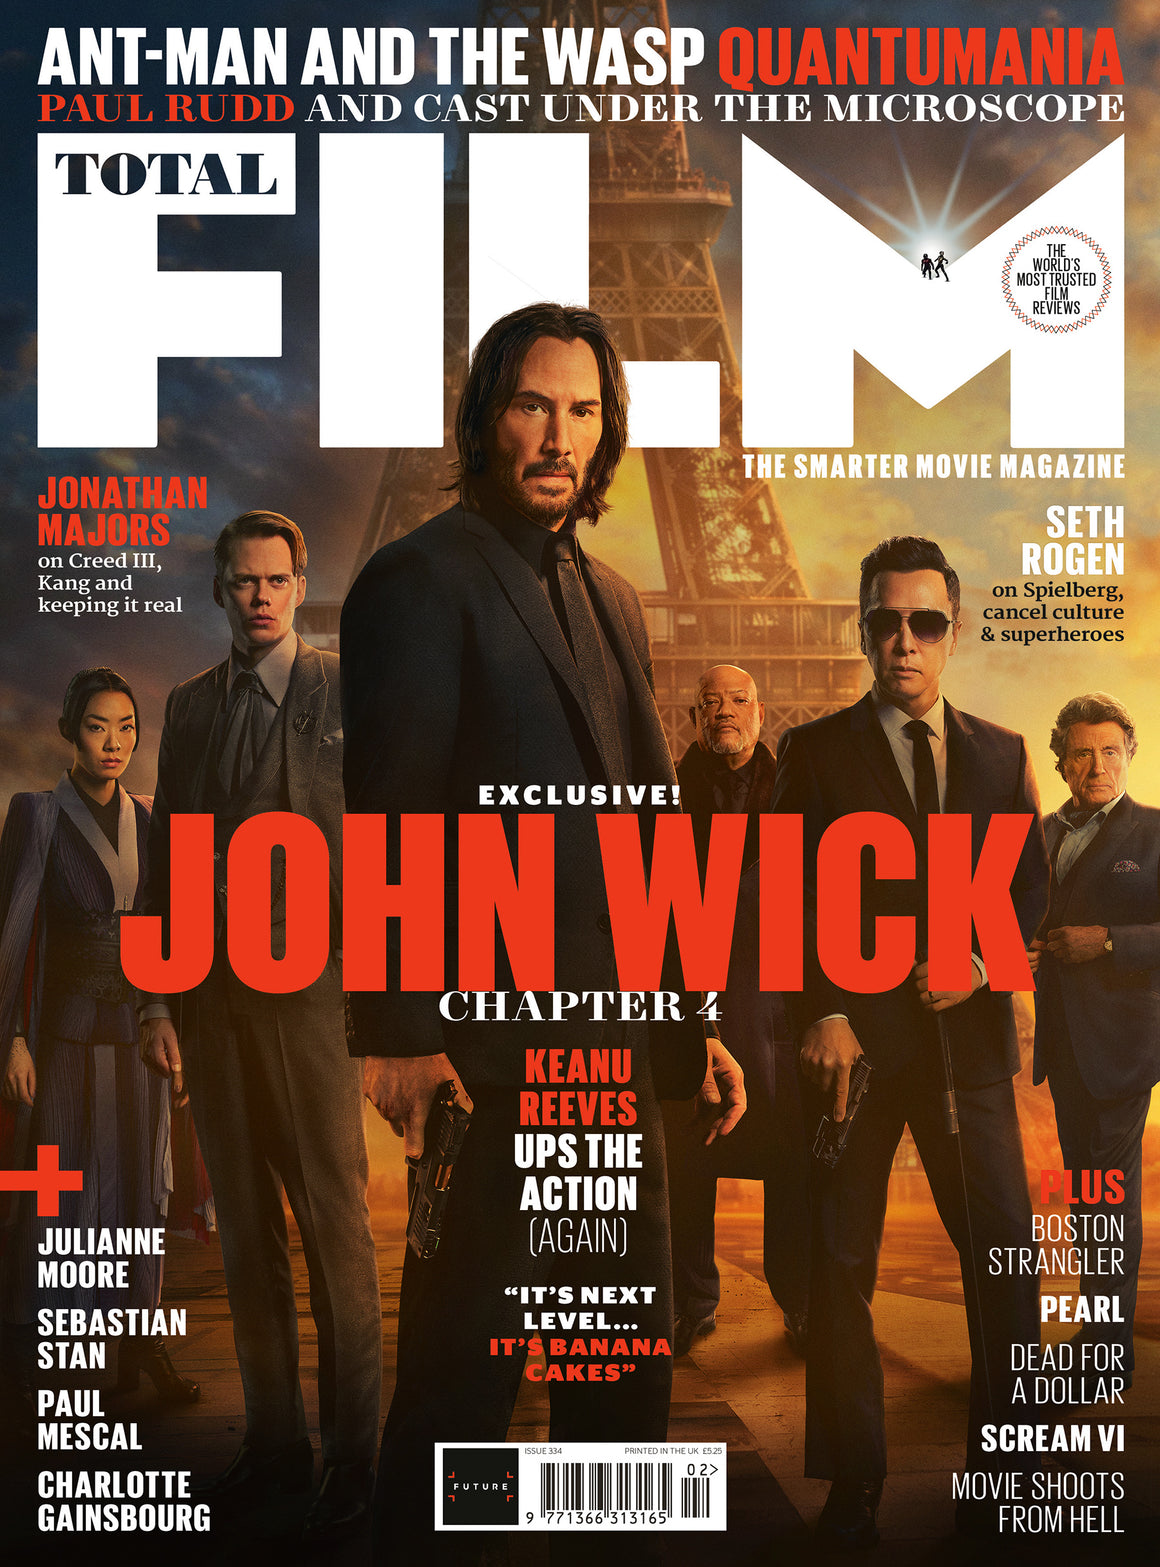 TOTAL FILM Magazine #334 JOHN WICK CHAPTER 4 WORLD EXCLUSIVE Keanu Reeves